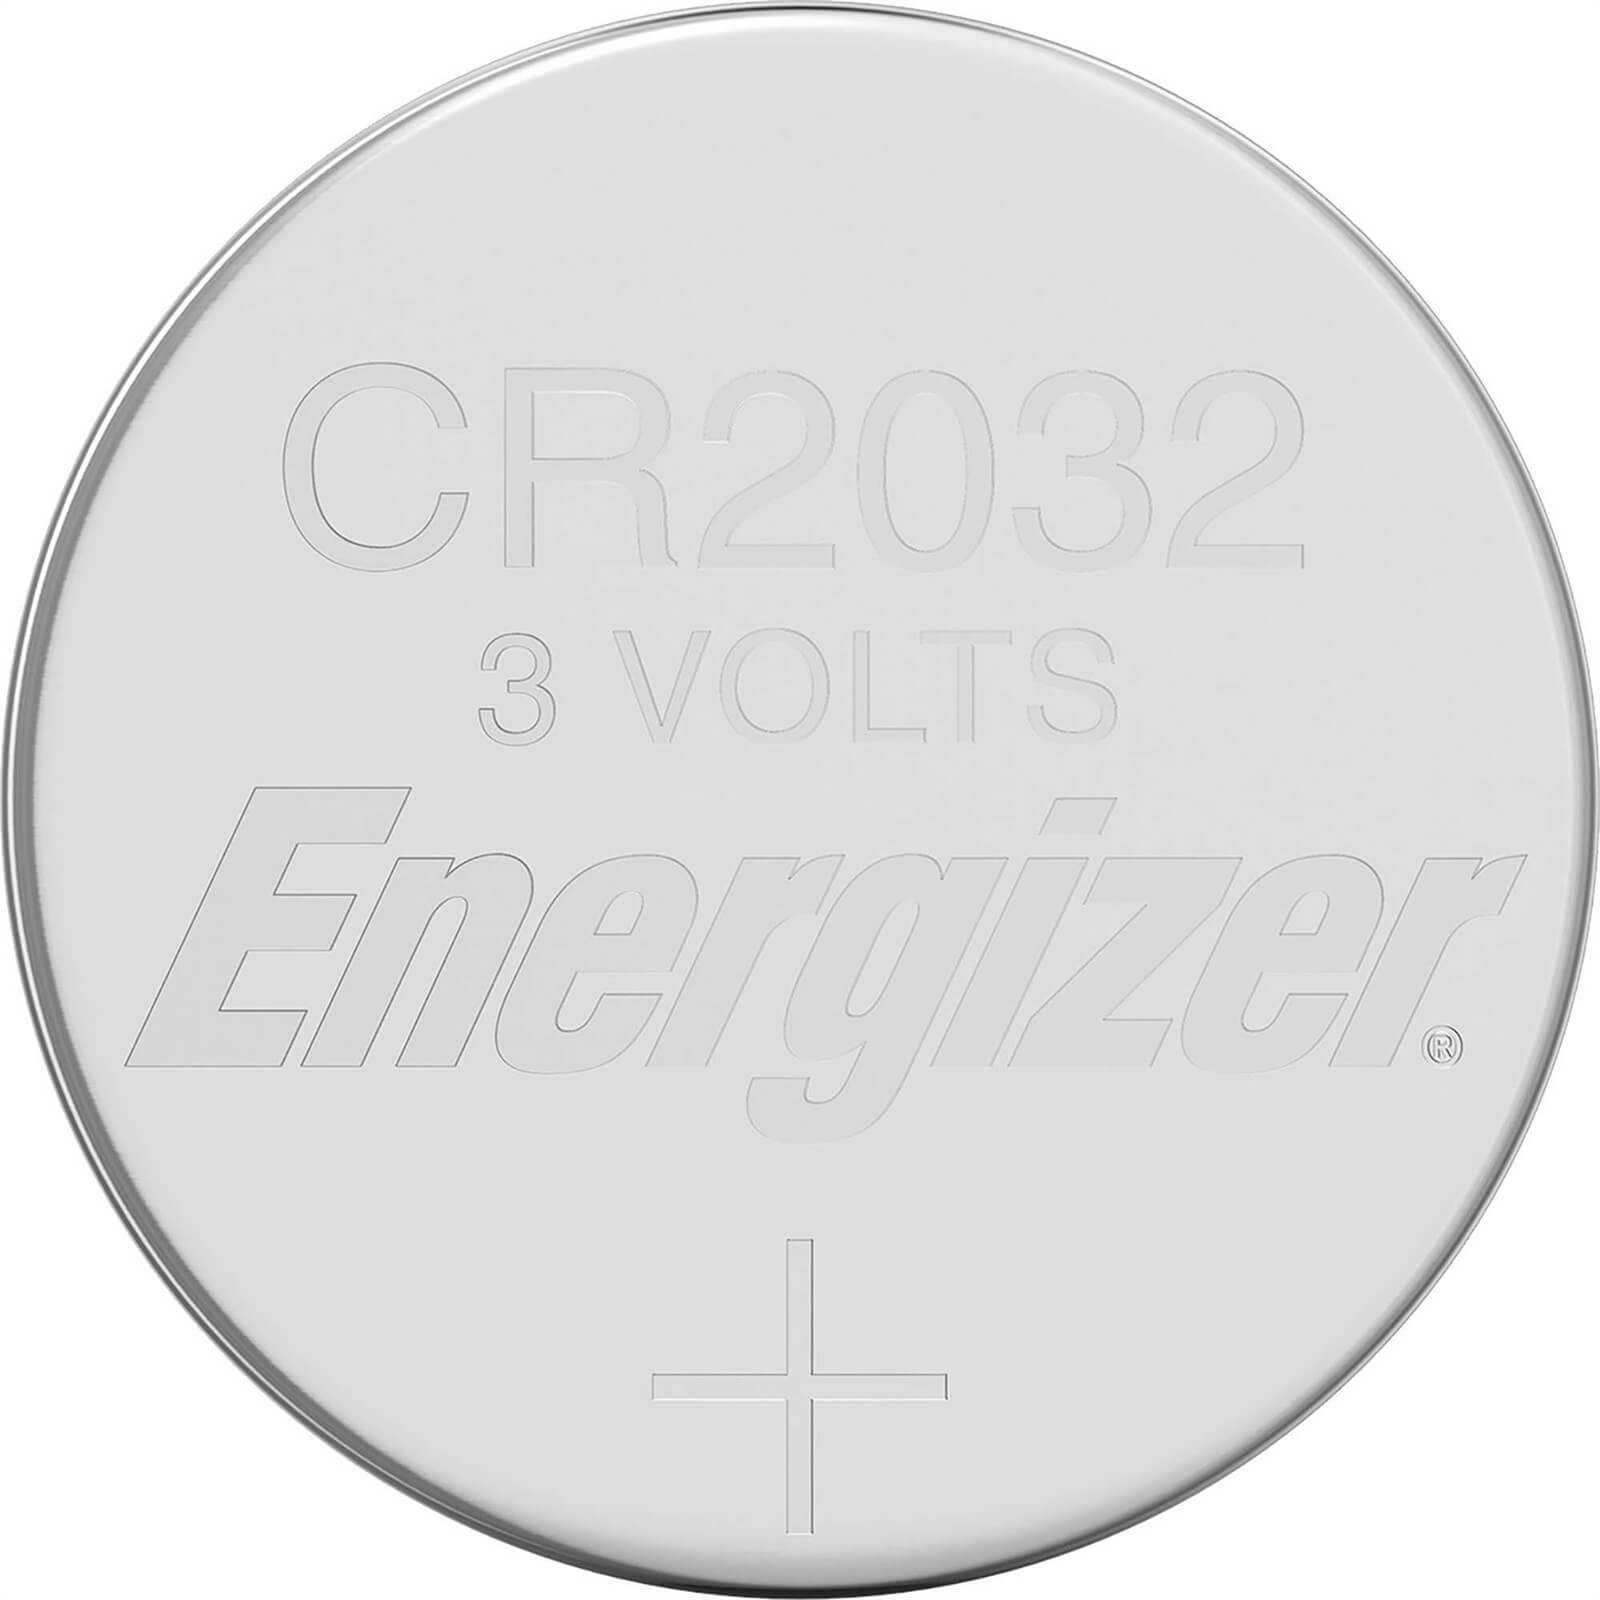 Energizer 2032 Lithium Coin Battery - 4 Pack